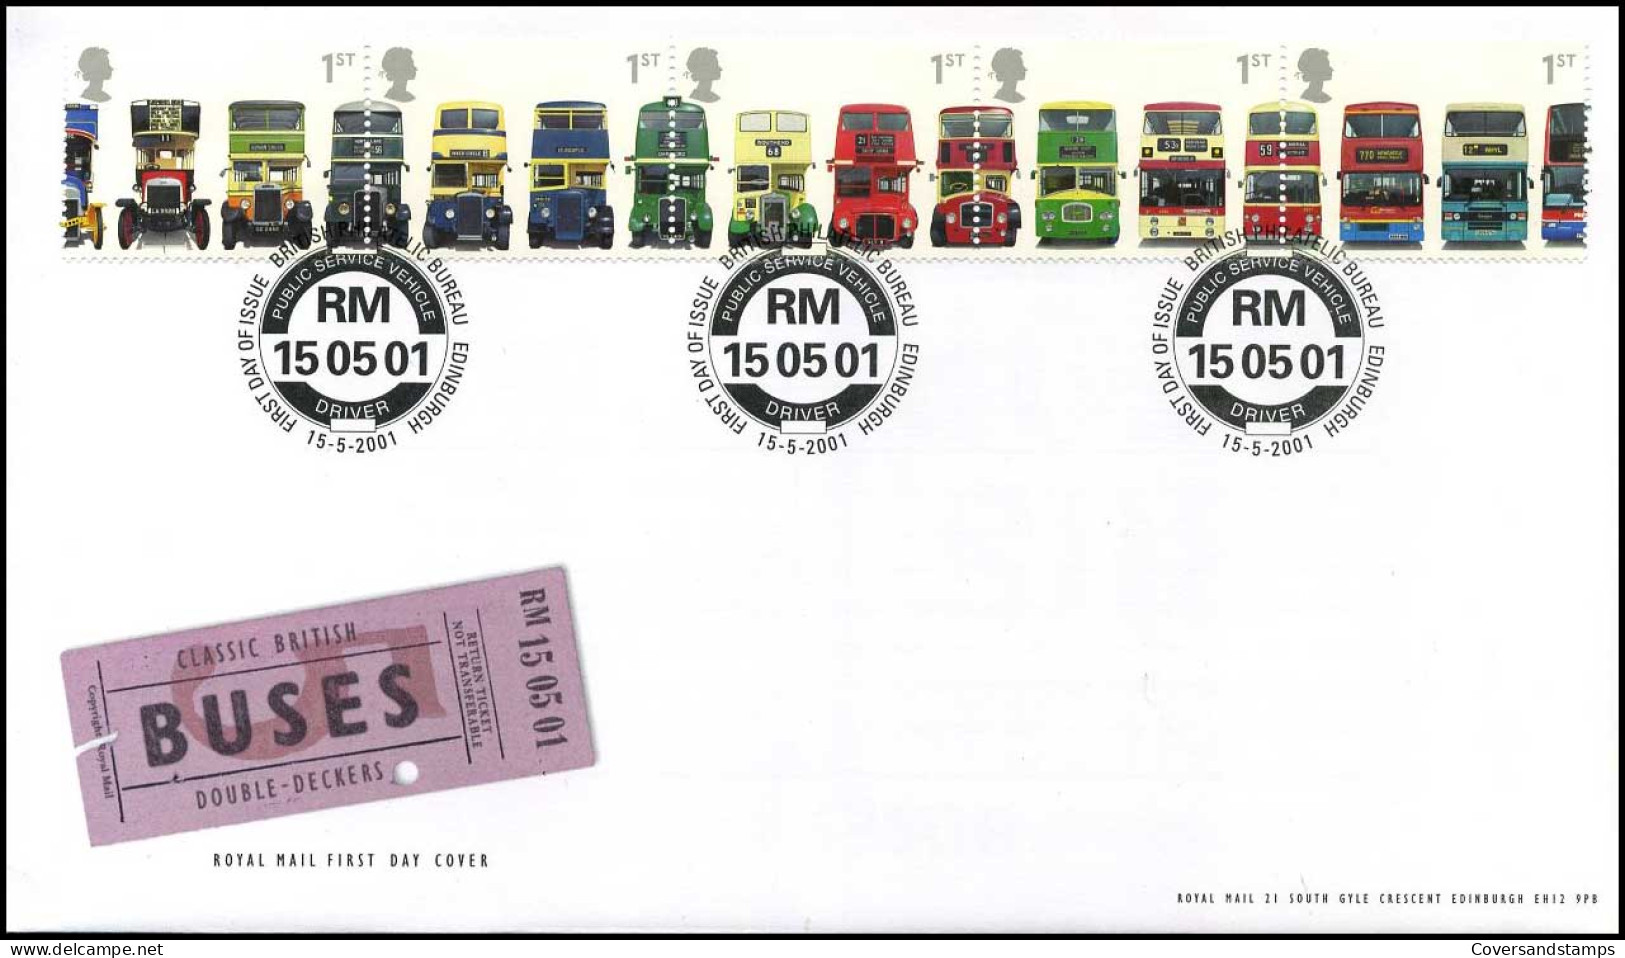 Great-Britain - FDC - Classic British Double-Deckers - Bussen